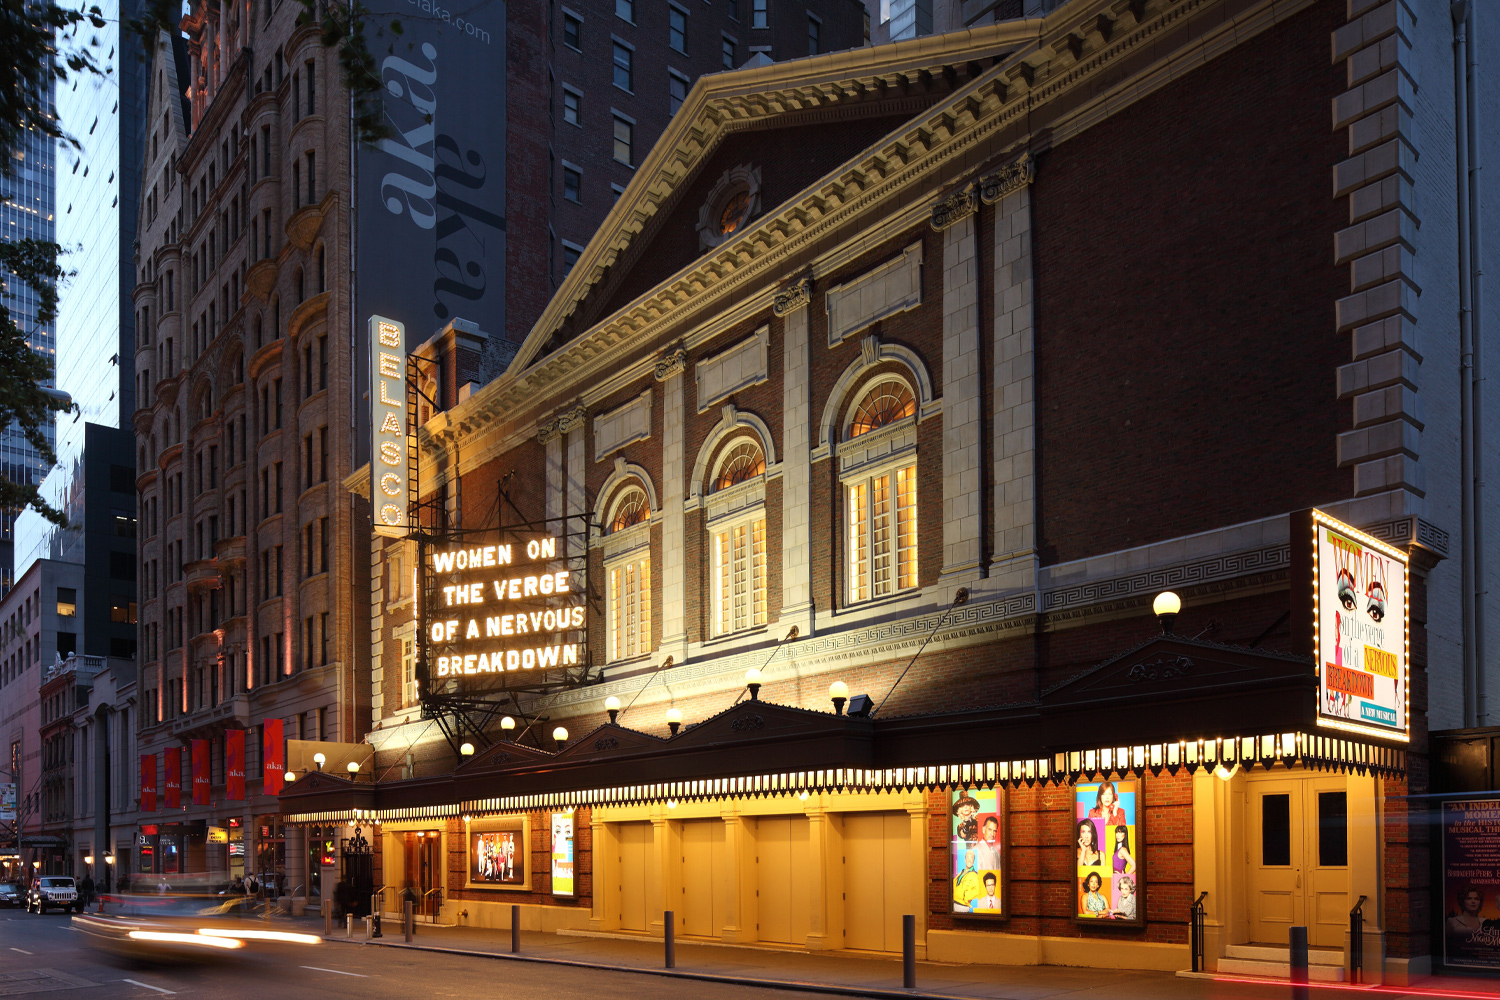 The Belasco Theater front in New York City